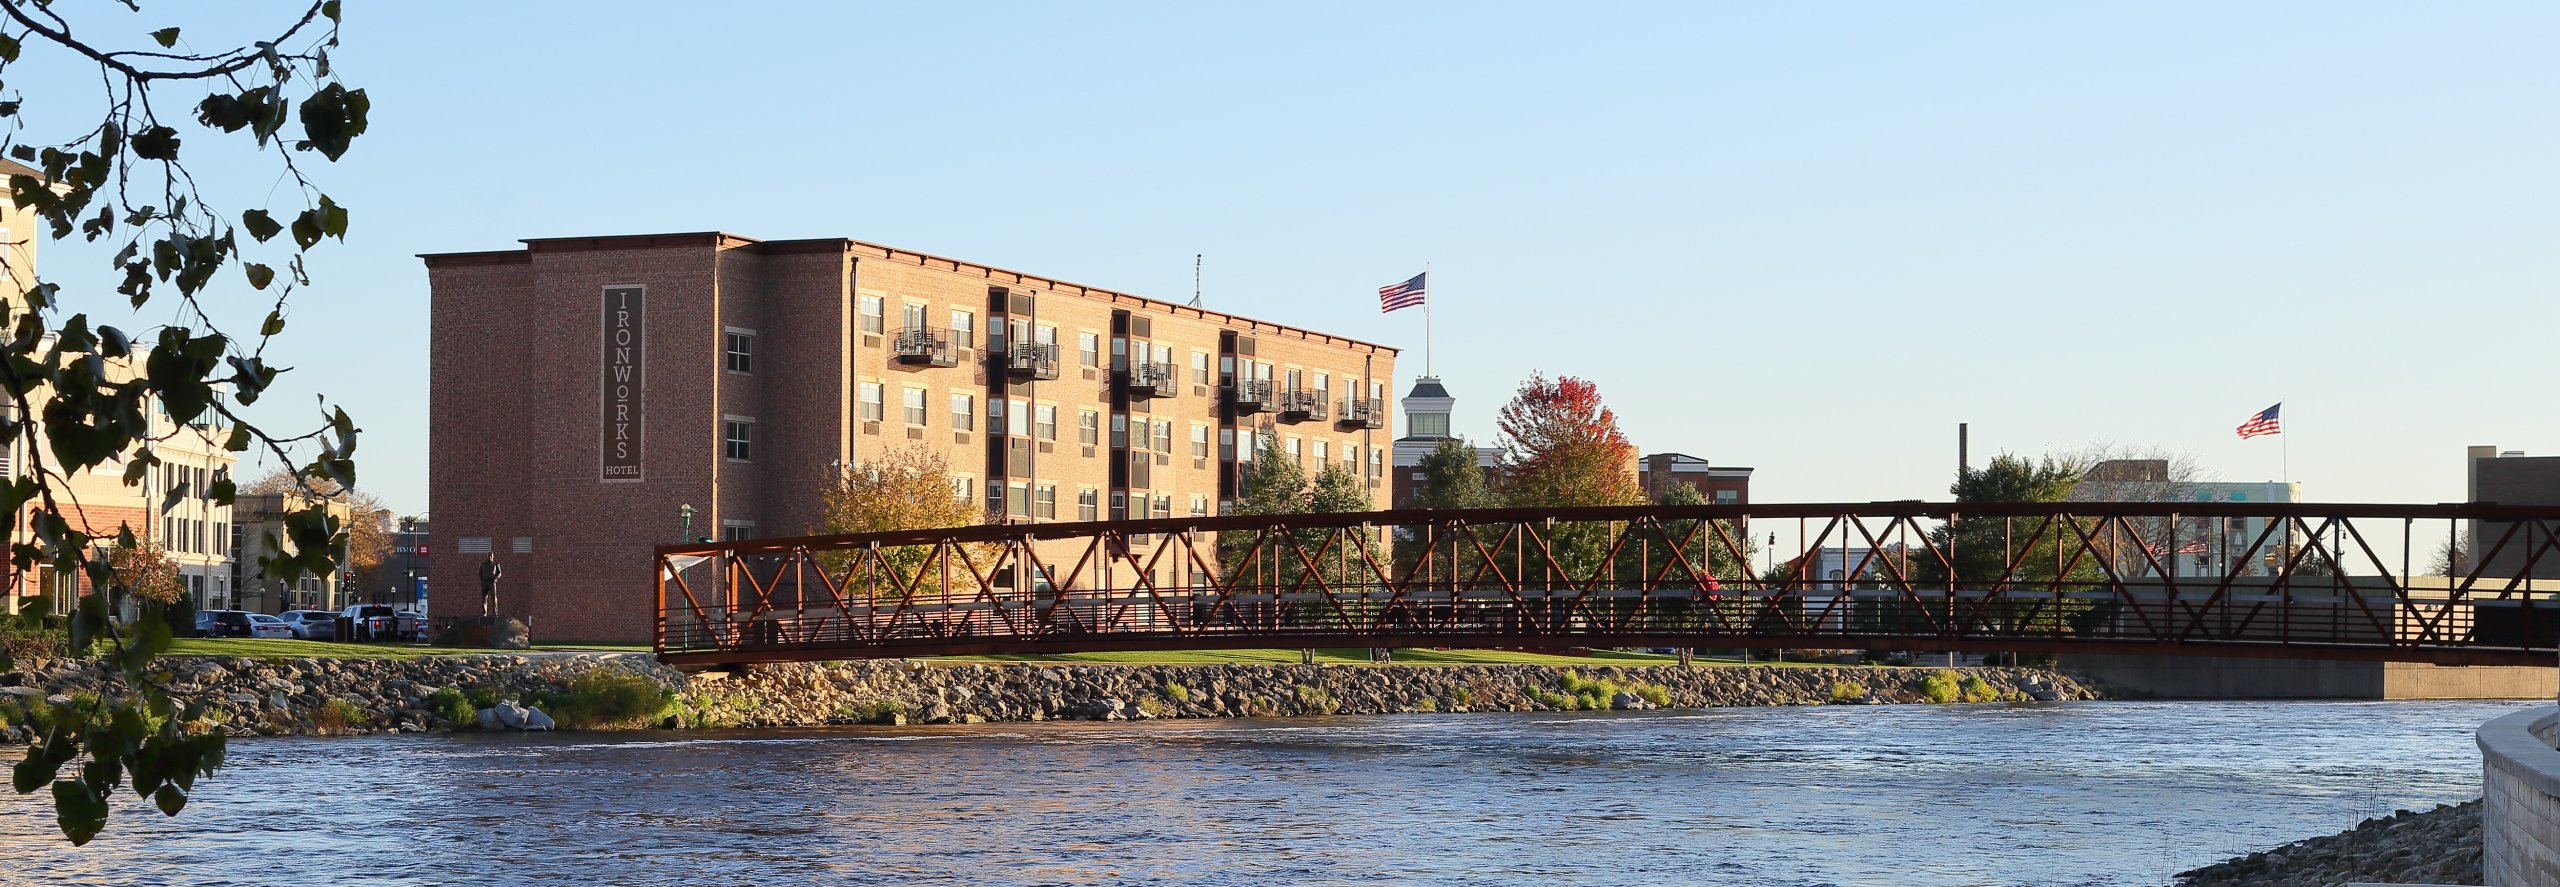 Ironworks Hotel - Contact Us at Visit Beloit in Beloit WI